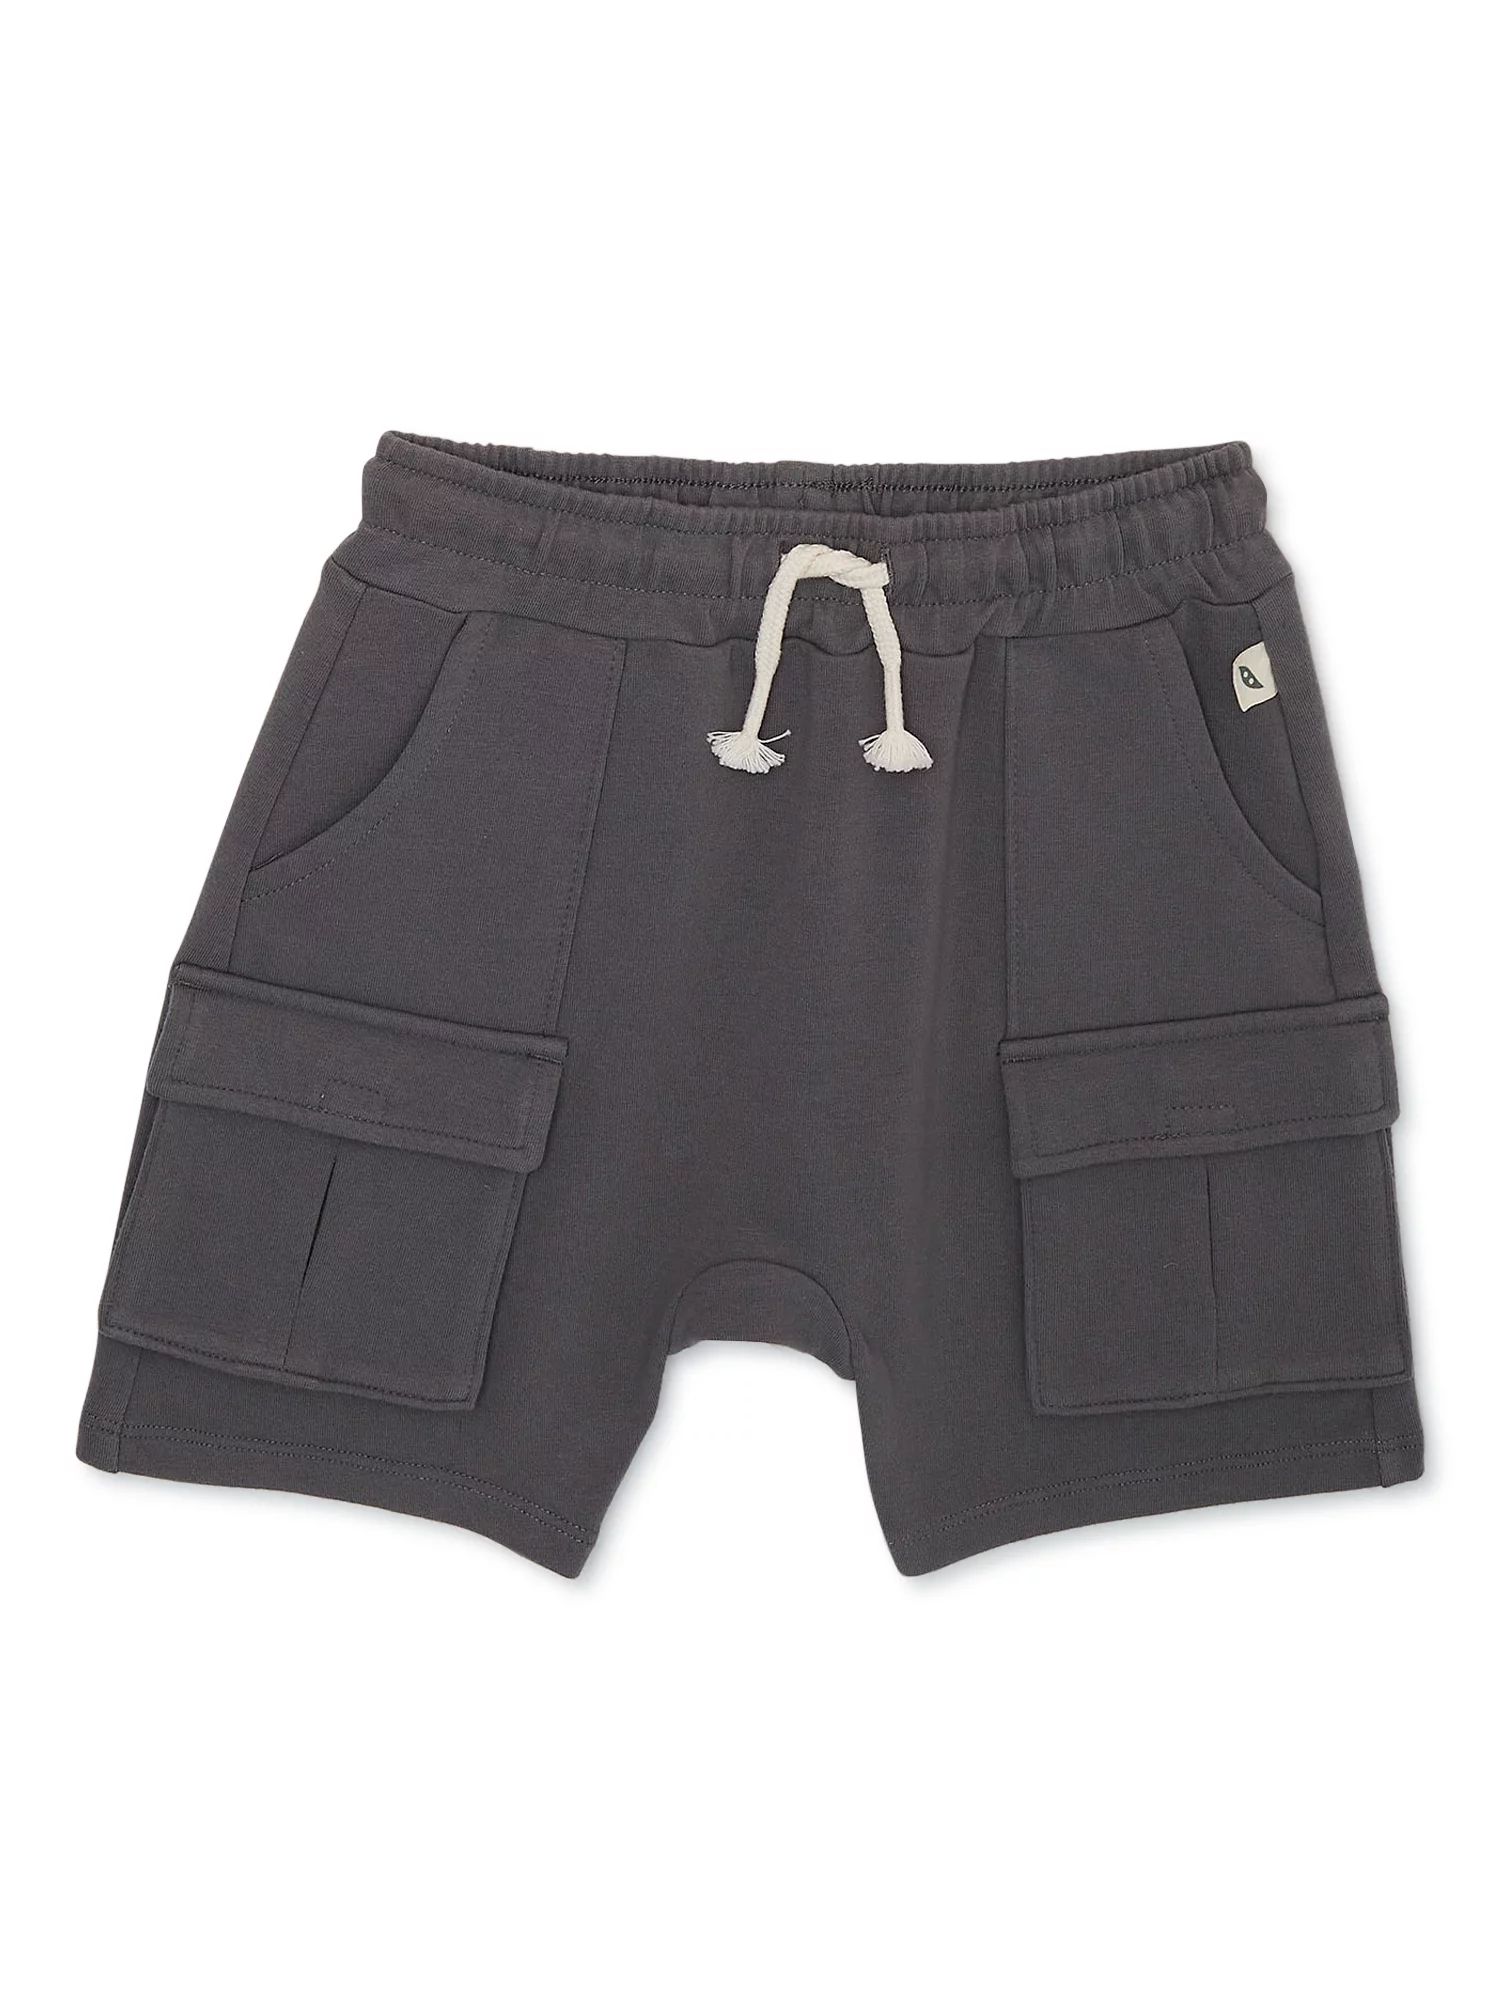 easy-peasy Toddler Boy French Terry Cargo Shorts, Sizes 12 Months-5T | Walmart (US)